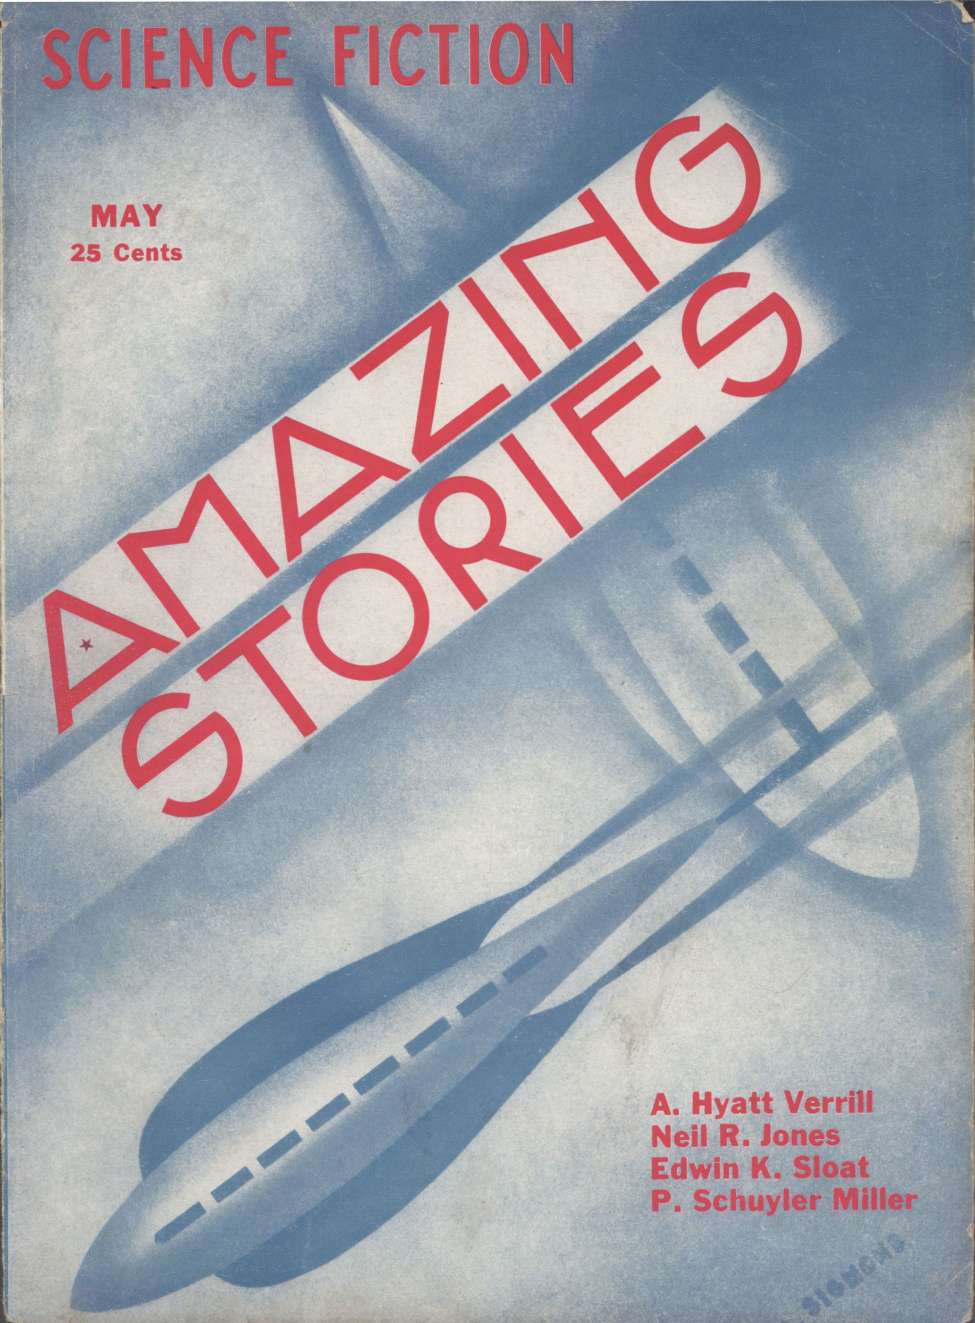 Comic Book Cover For Amazing Stories v8 2 - The Death Drum - A. Hyatt Verrill